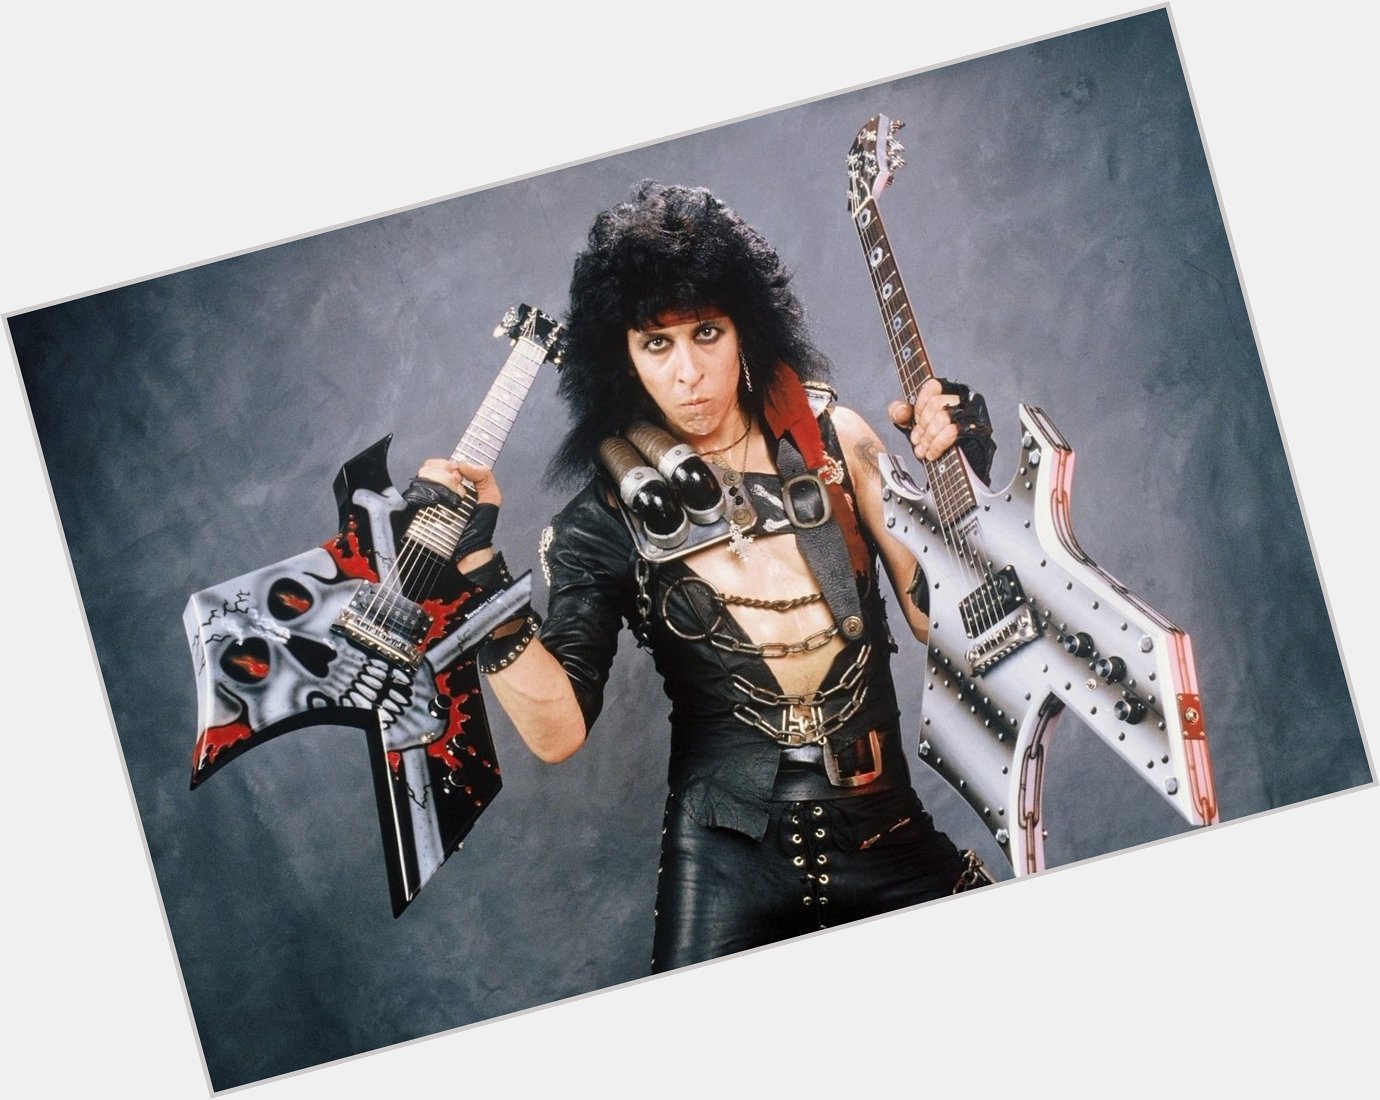 Happy birthday to Randy Piper of W.A.S.P. 